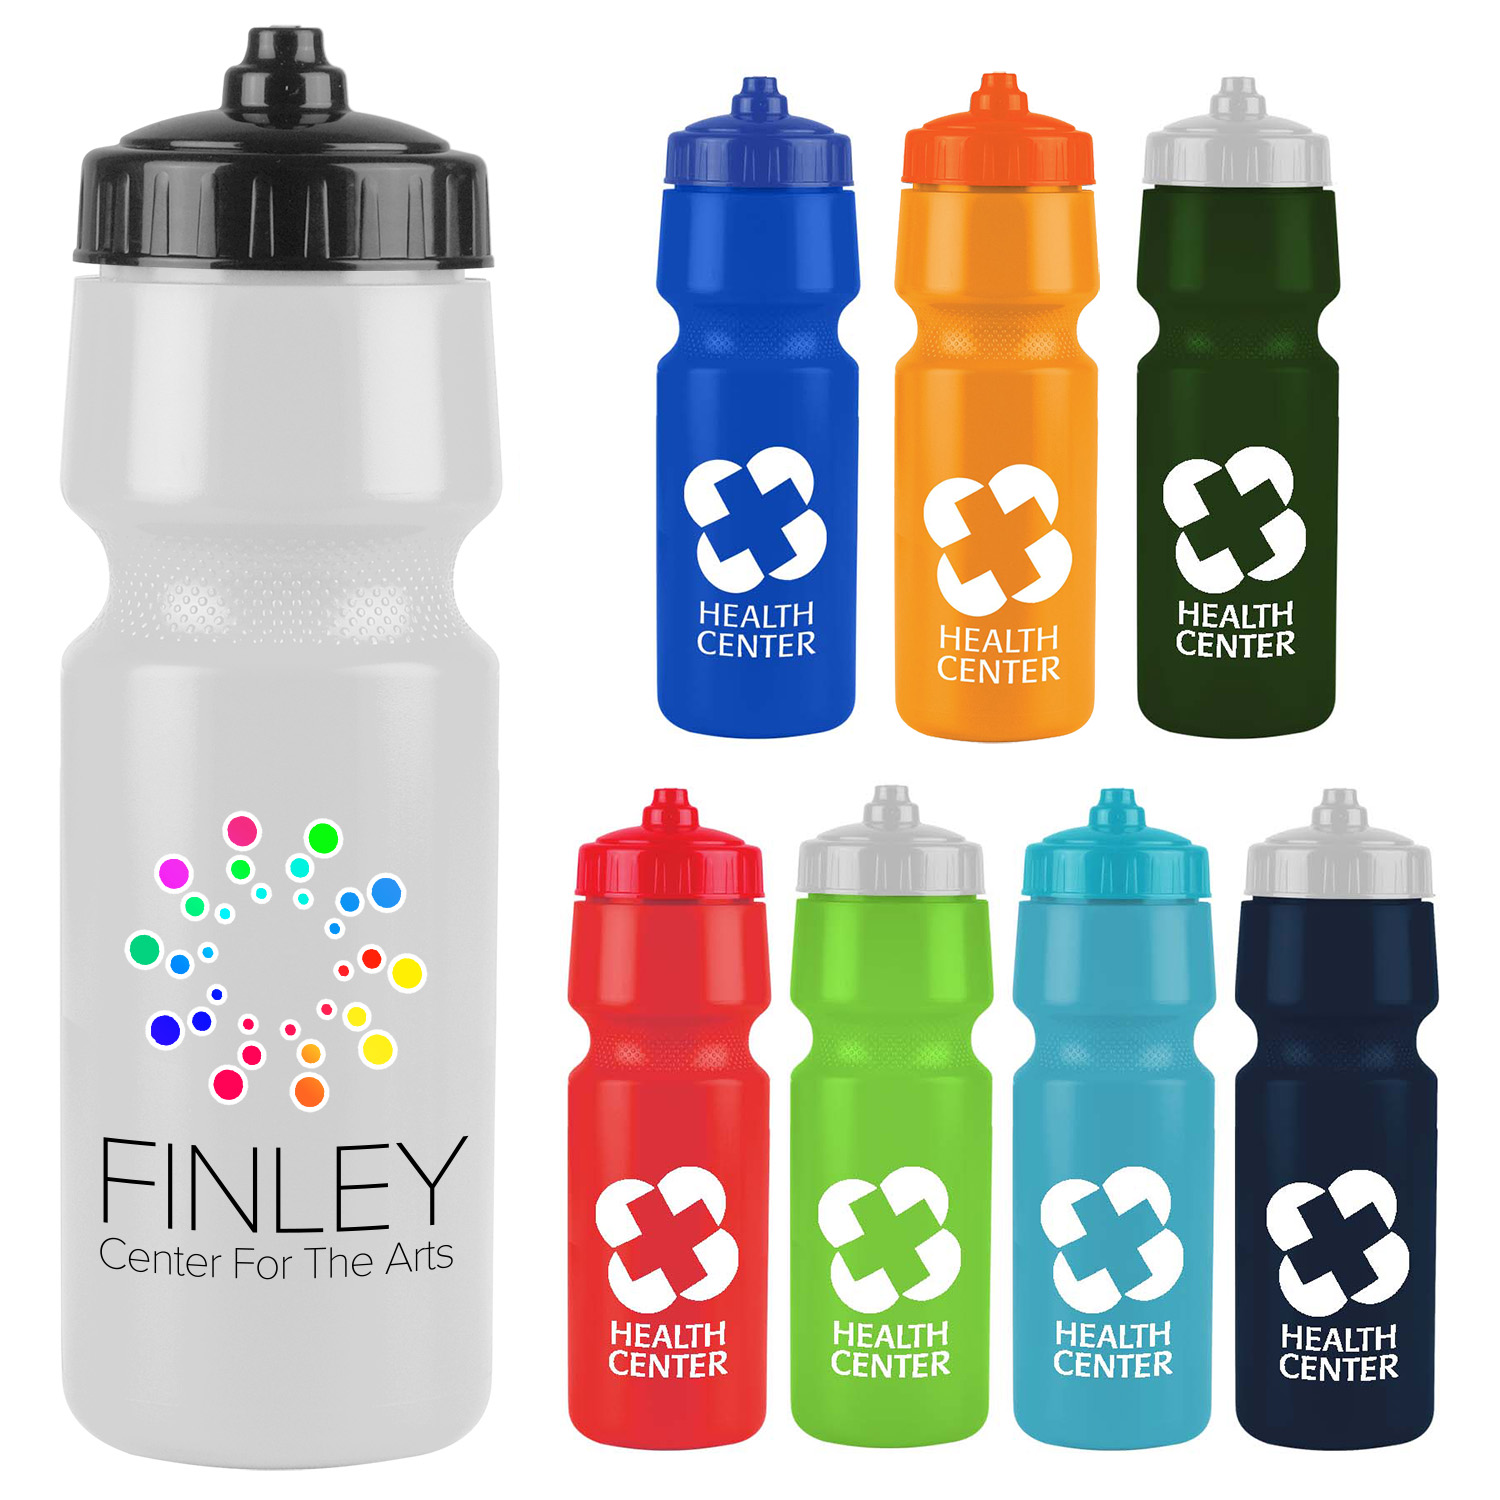 water bottles with custom branding, fitness promotional items